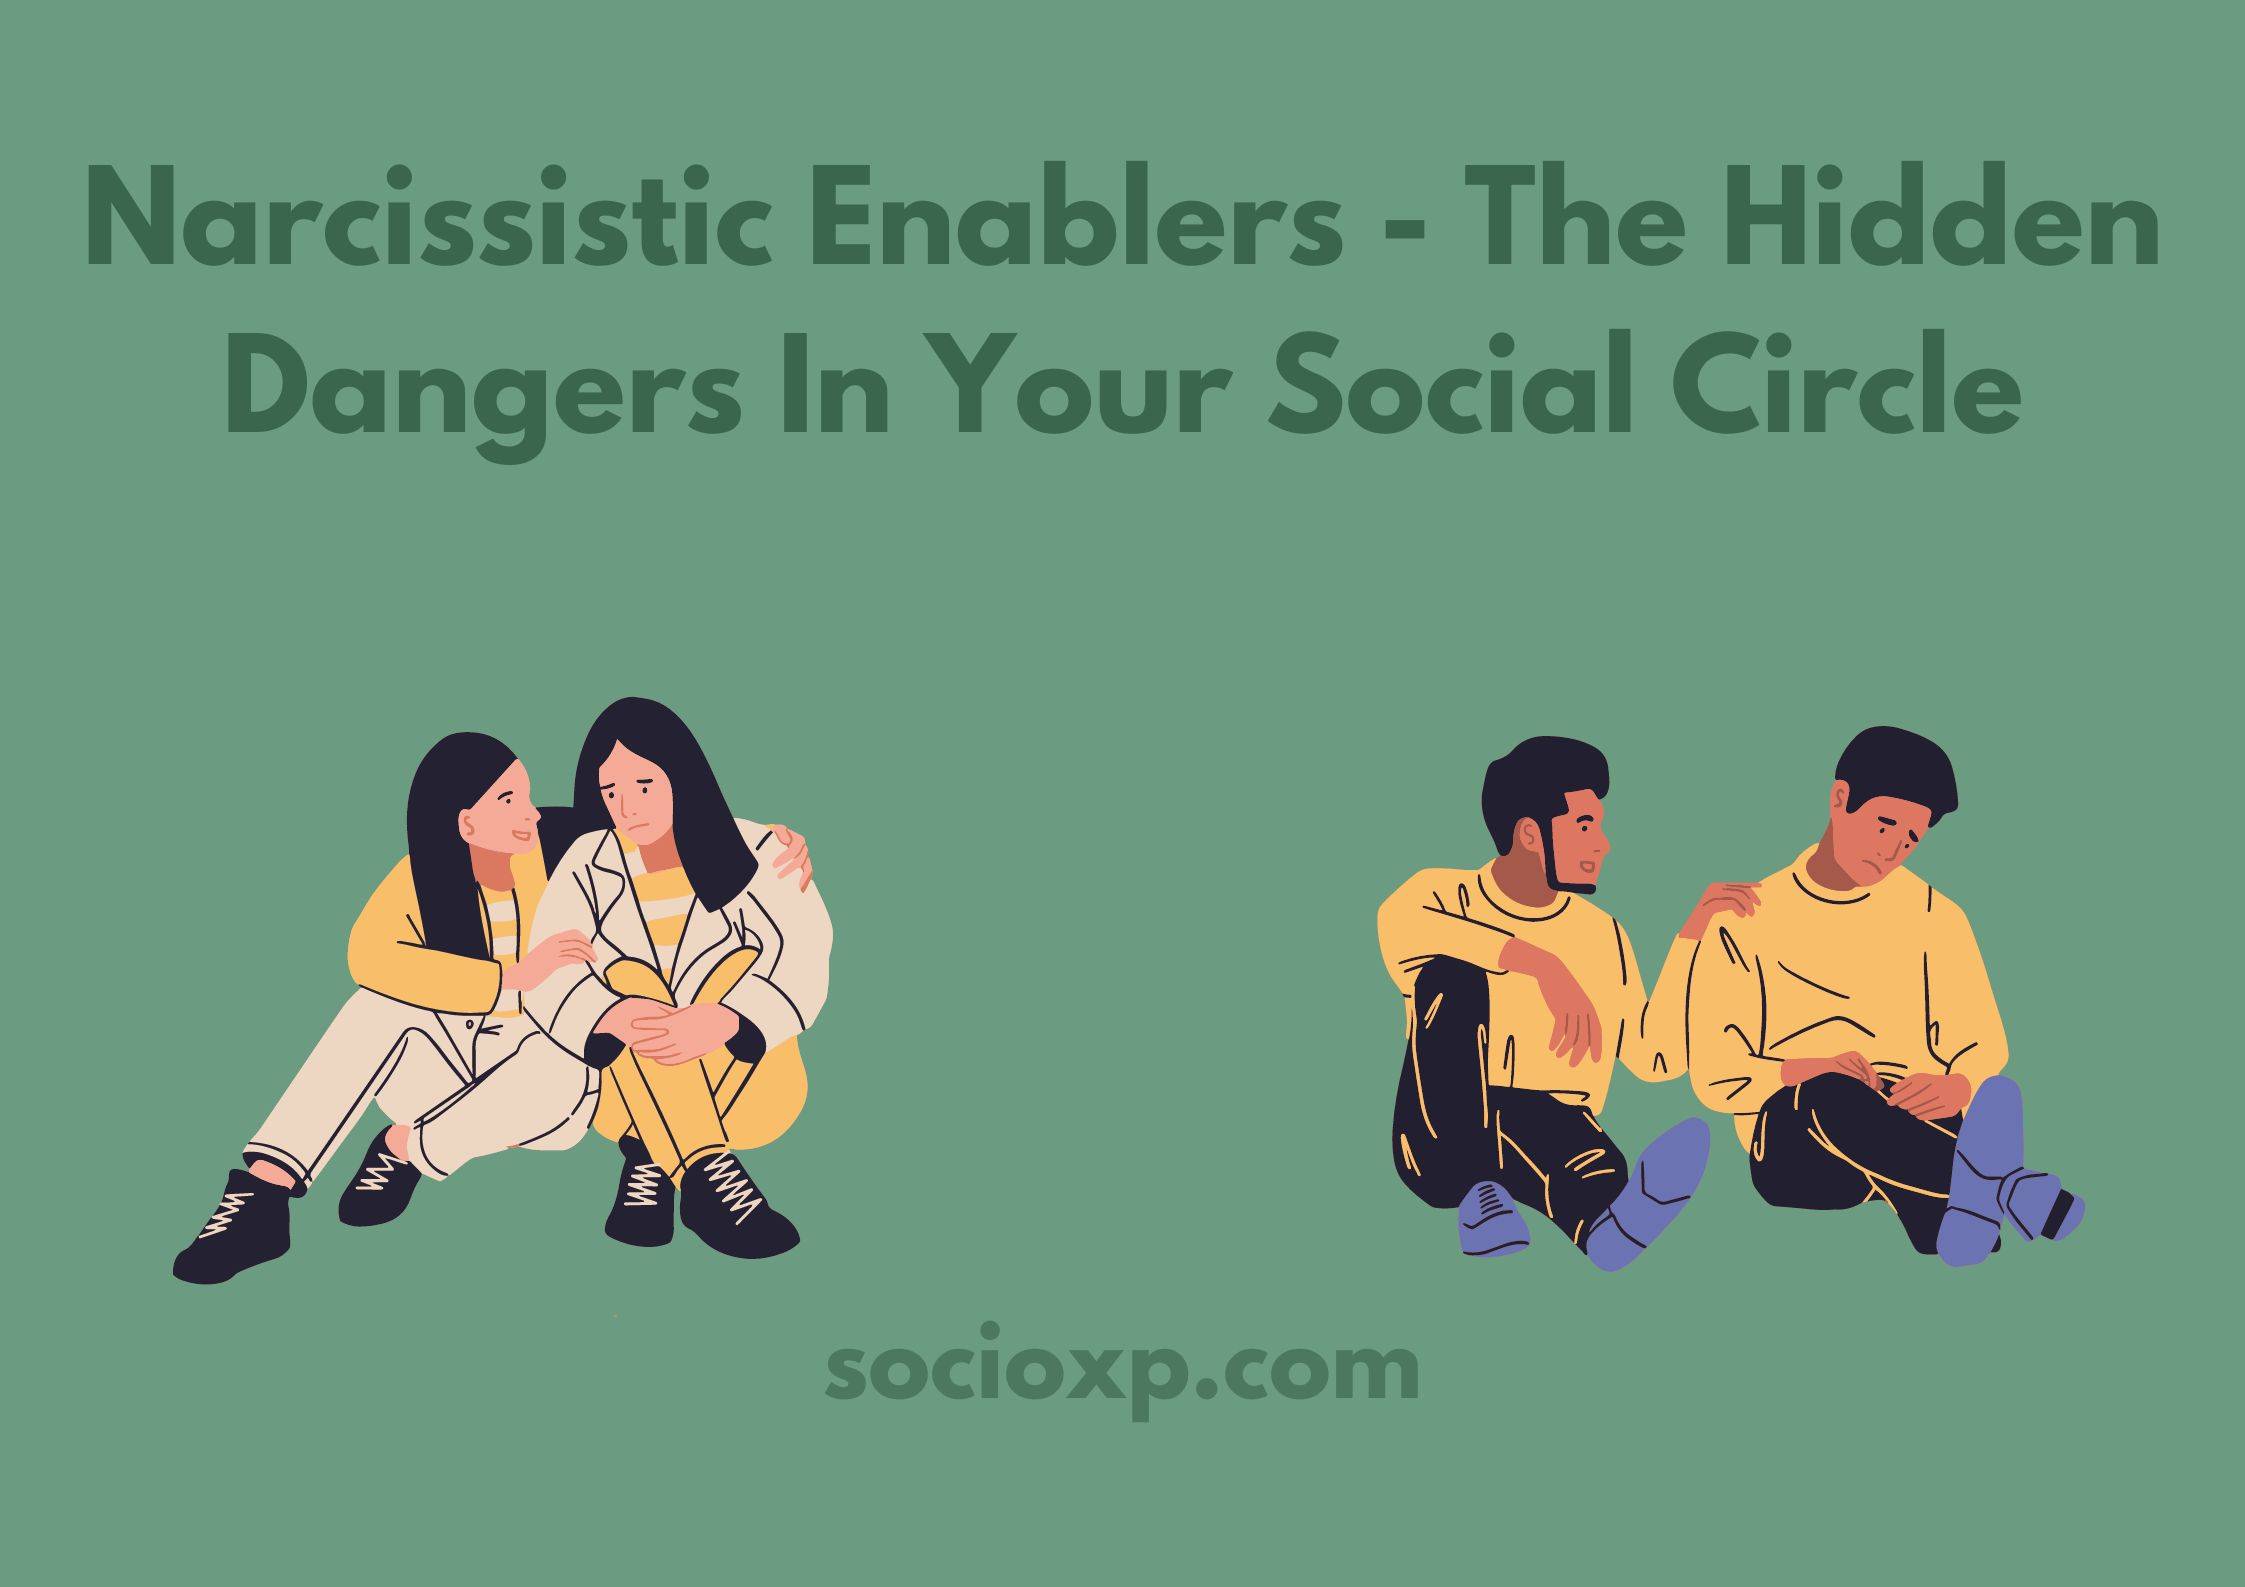 Narcissistic Enablers - The Hidden Dangers In Your Social Circle